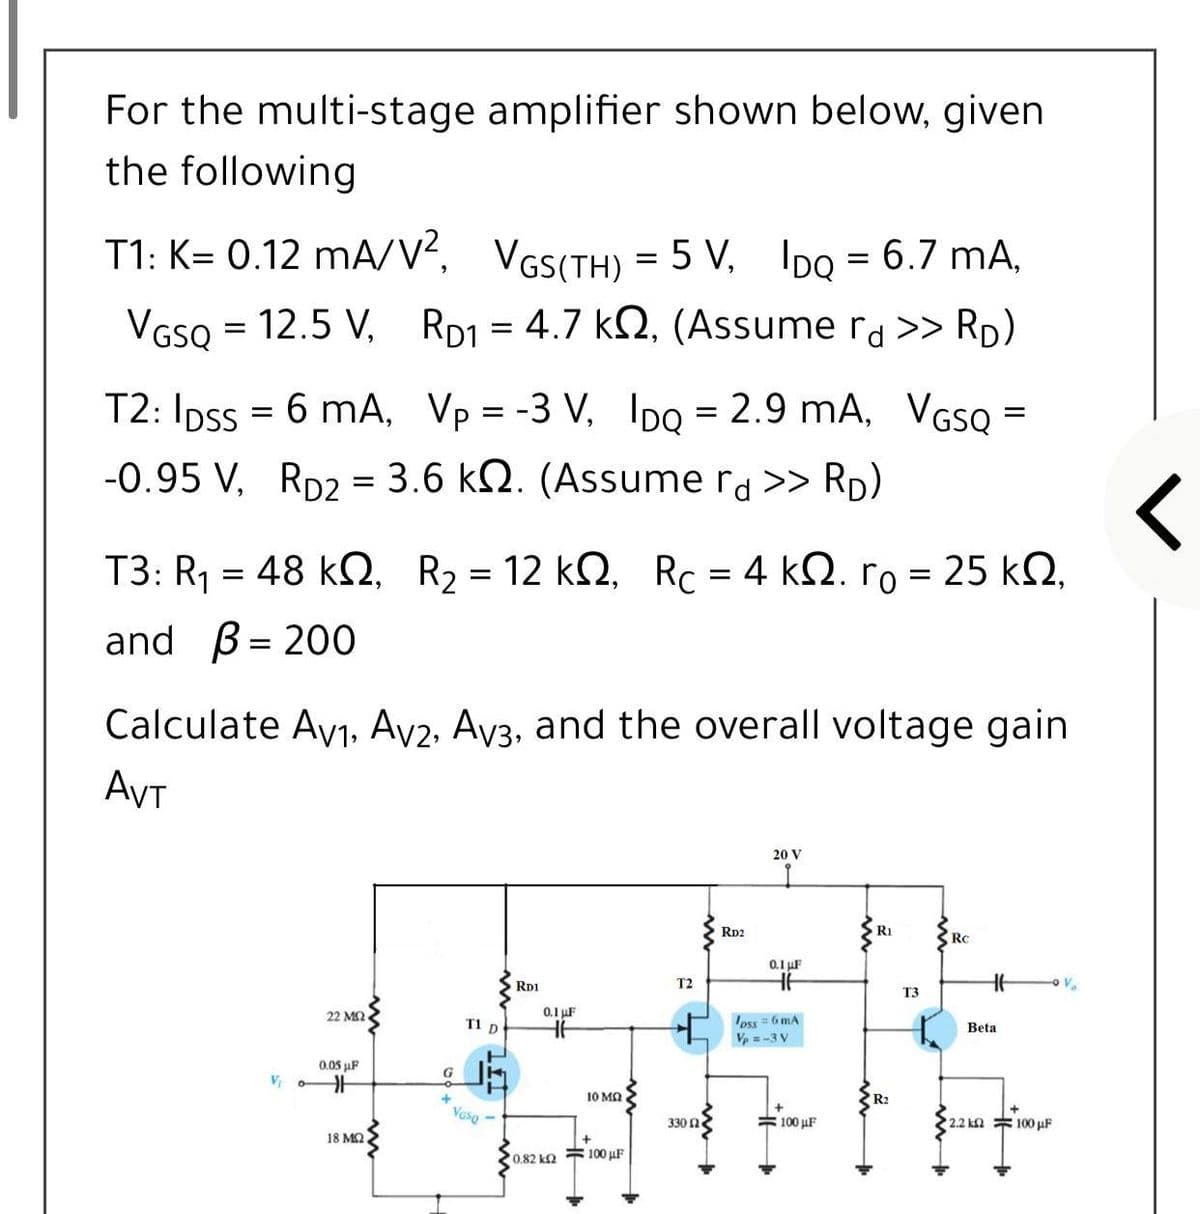 For the multi-stage amplifier shown below, given
the following
T1: K= 0.12 mA/V?, VGS(TH) = 5 V, IDo = 6.7 mA,
VGSQ = 12.5 V, RD1 = 4.7 k2, (Assume ra >> RD)
T2: Ipss = 6 mA, Vp = -3 V, 1IDO = 2.9 mA, VGS =
%3D
-0.95 V, Rp2 = 3.6 kN. (Assume ra >> RD)
T3: R1 = 48 kQ, R2 = 12 k2, Rc = 4 kQ. ro = 25 k2,
and
B= 200
Calculate Av1, Av2, Ay3, and the overall voltage gain
AVT
20 V
Rp2
RI
Rc
0.1 uF
RD1
T2
T3
22 MQ
0.1 uF
oss =6 mA
Vp =-3 V
T1 D
Beta
0.05 µF
G
10 MQ
R2
Vaso -
330 Ω
#100 µF
2.2 kn 100 µF
18 MQ
0.82 k2 100 uF
